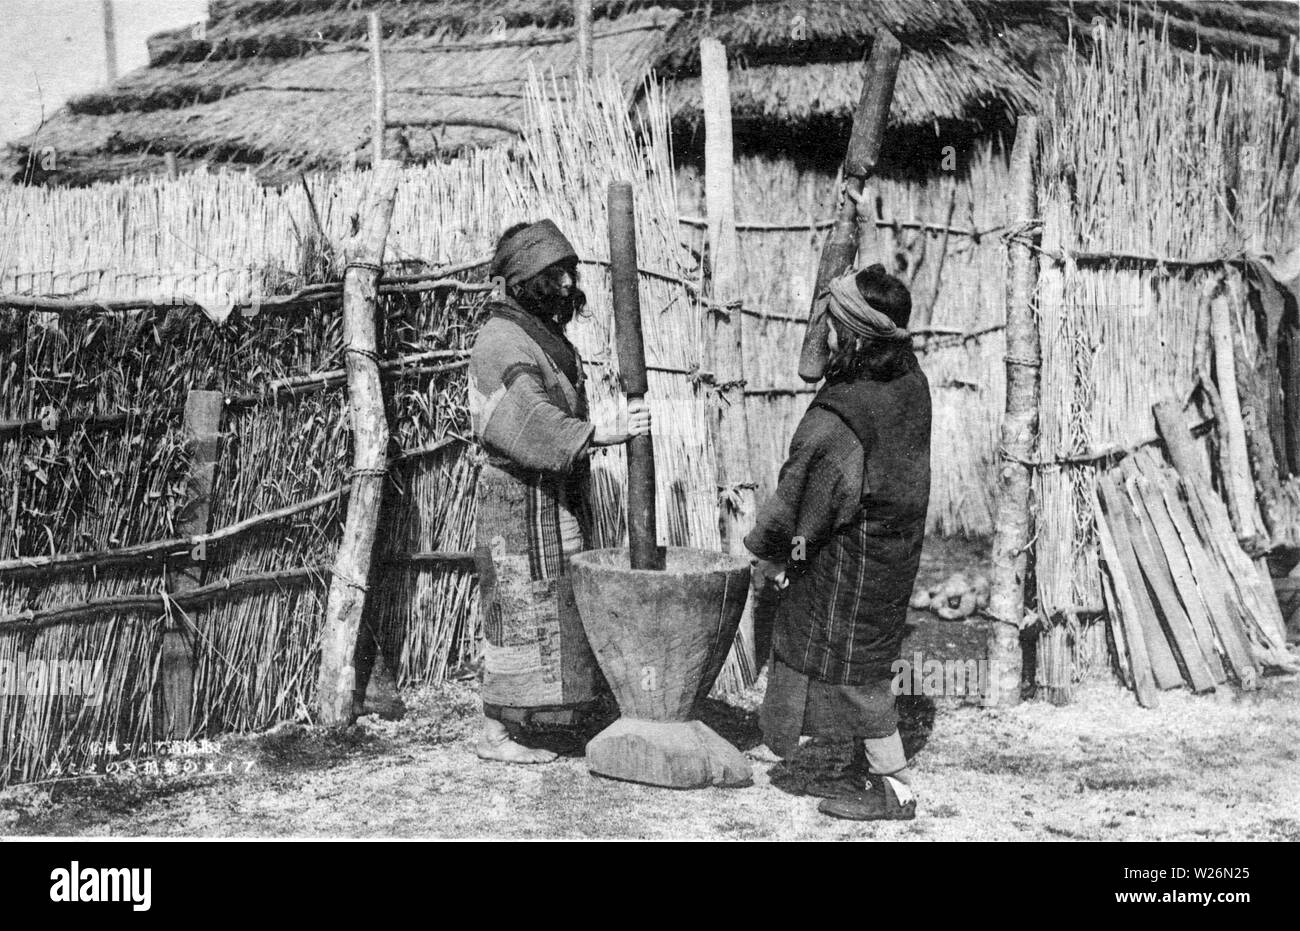 [ 1920s Japan - Ainu Women ] —   Two Ainu women using a traditional Ainu mortar (nisu), made from a hollowed-out sugi (cryptomeria) log. It was used for threshing millet (later replaced by rice), wheat, and roots, as well as for beating grains into flour and paste.  20th century vintage postcard. Stock Photo